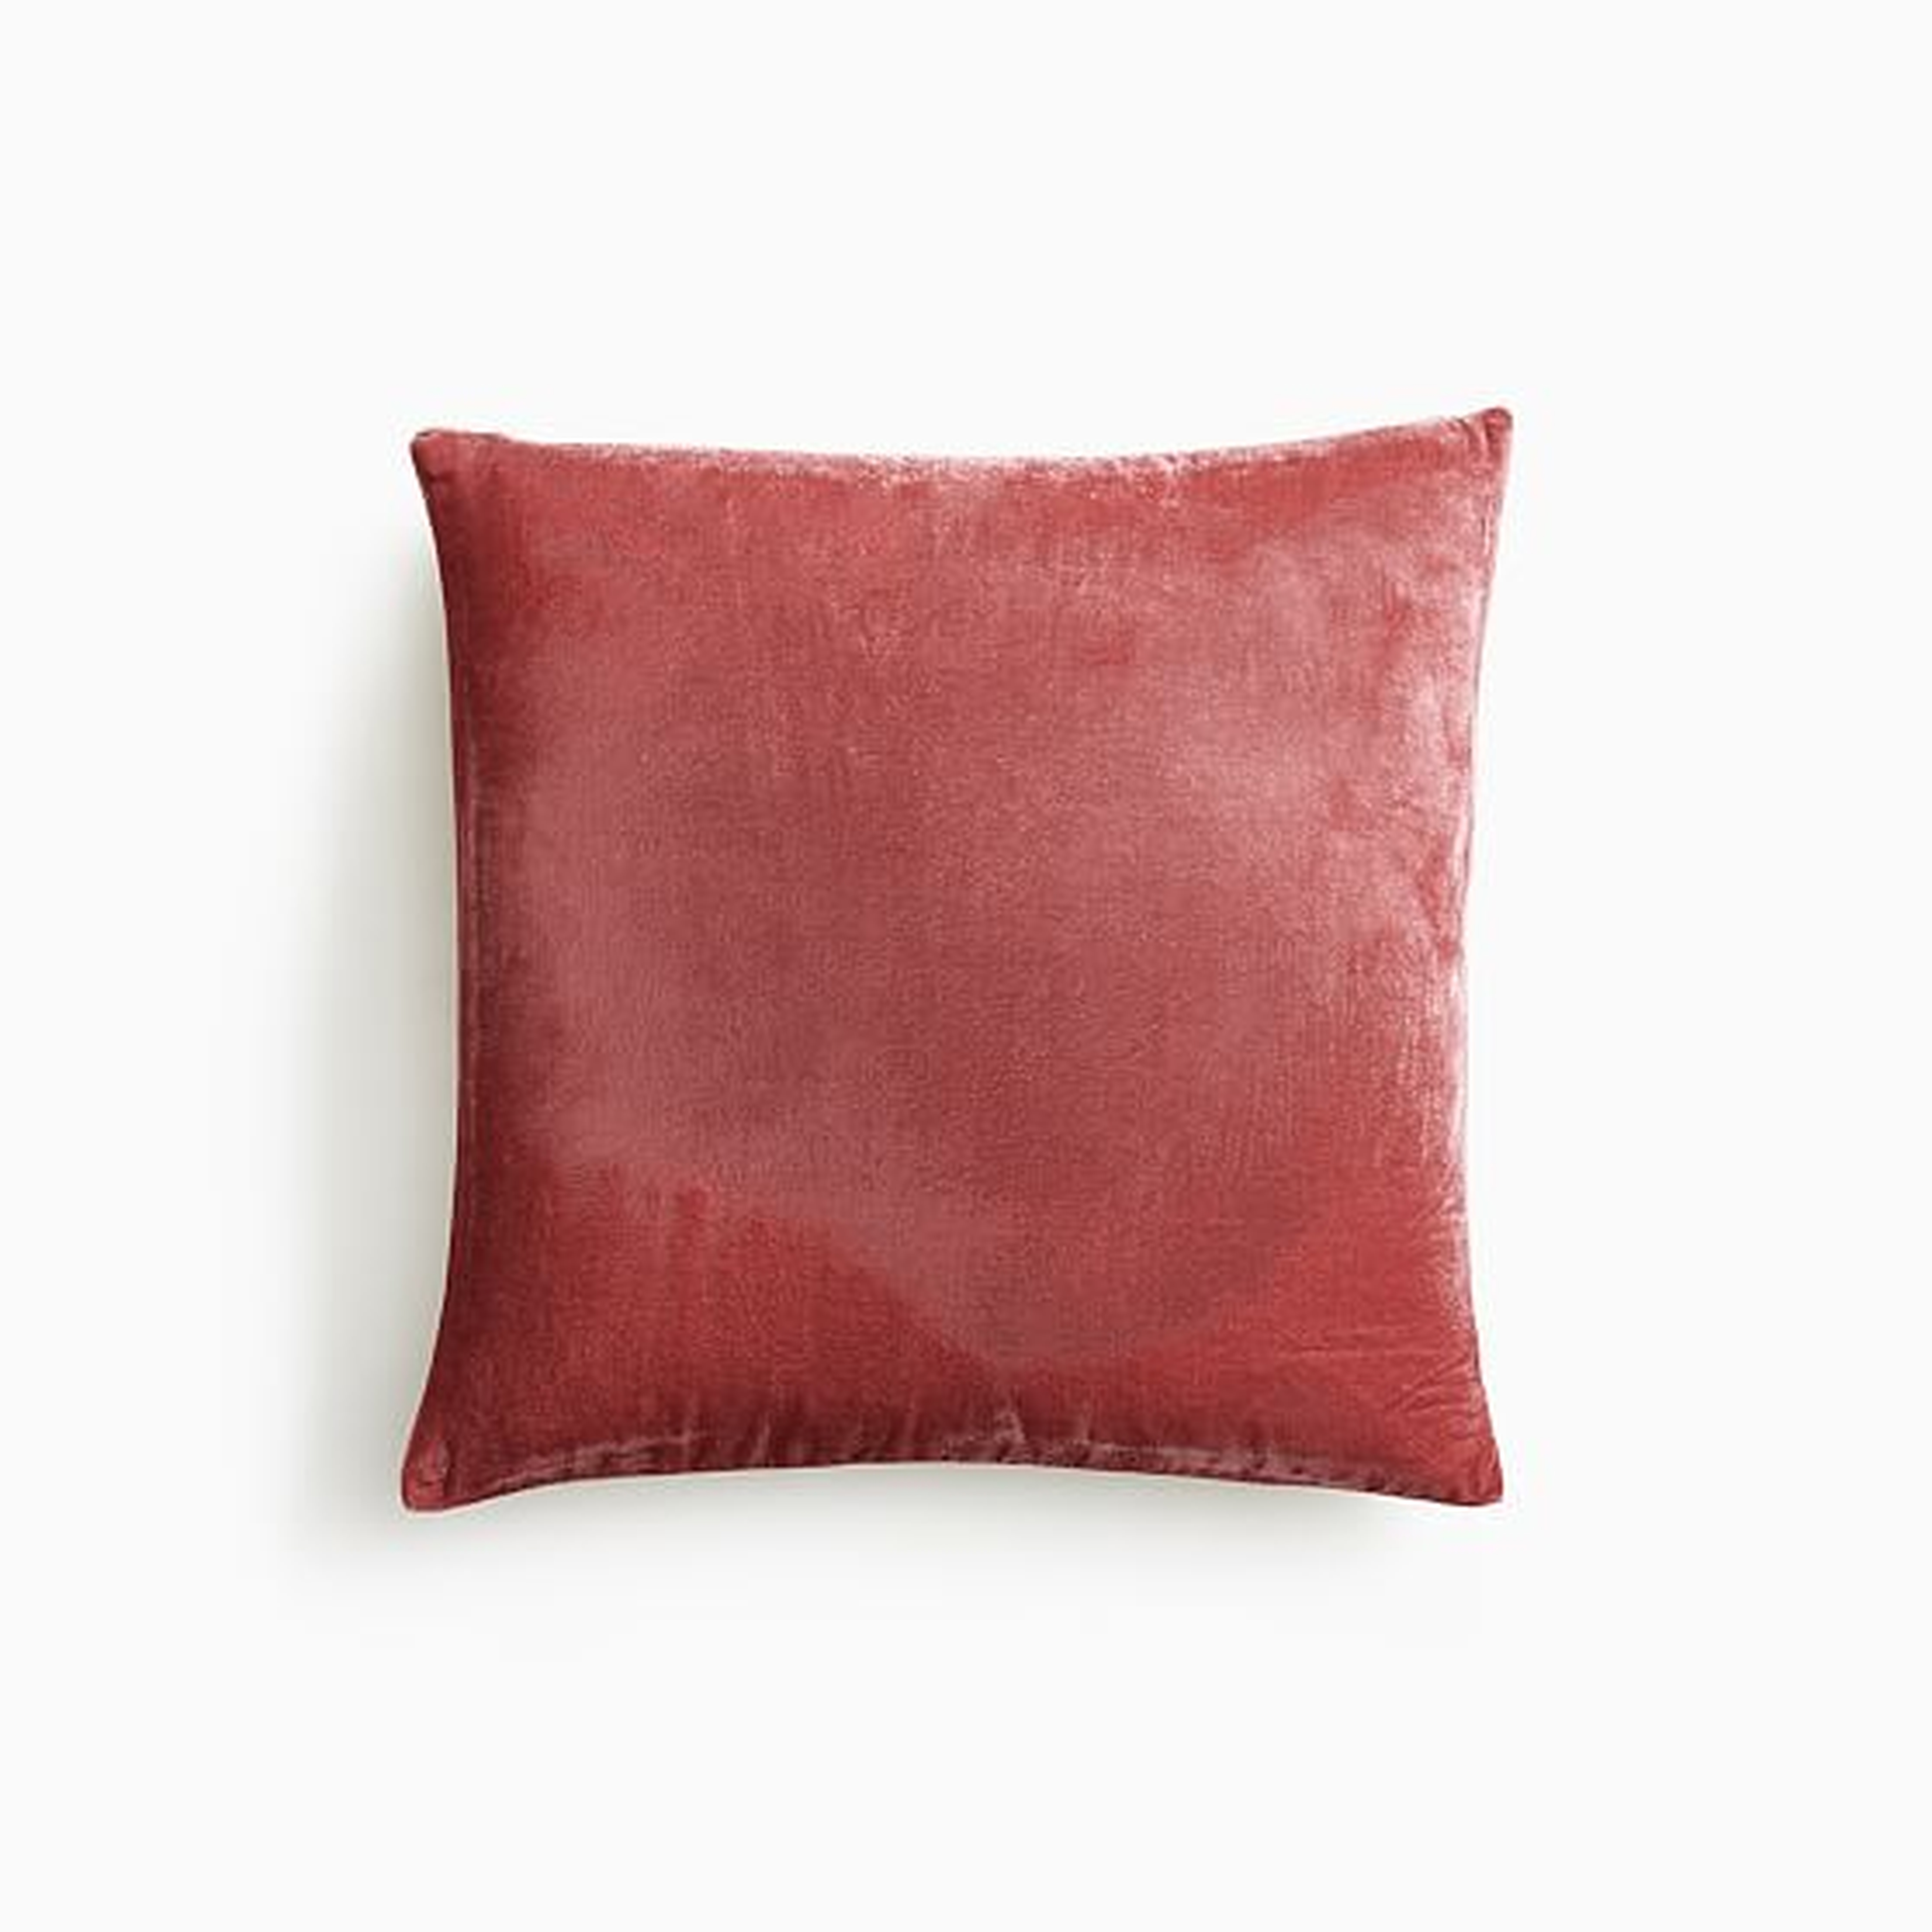 Lush Velvet Pillow Cover, 16" x 16", Washed Ruby - West Elm